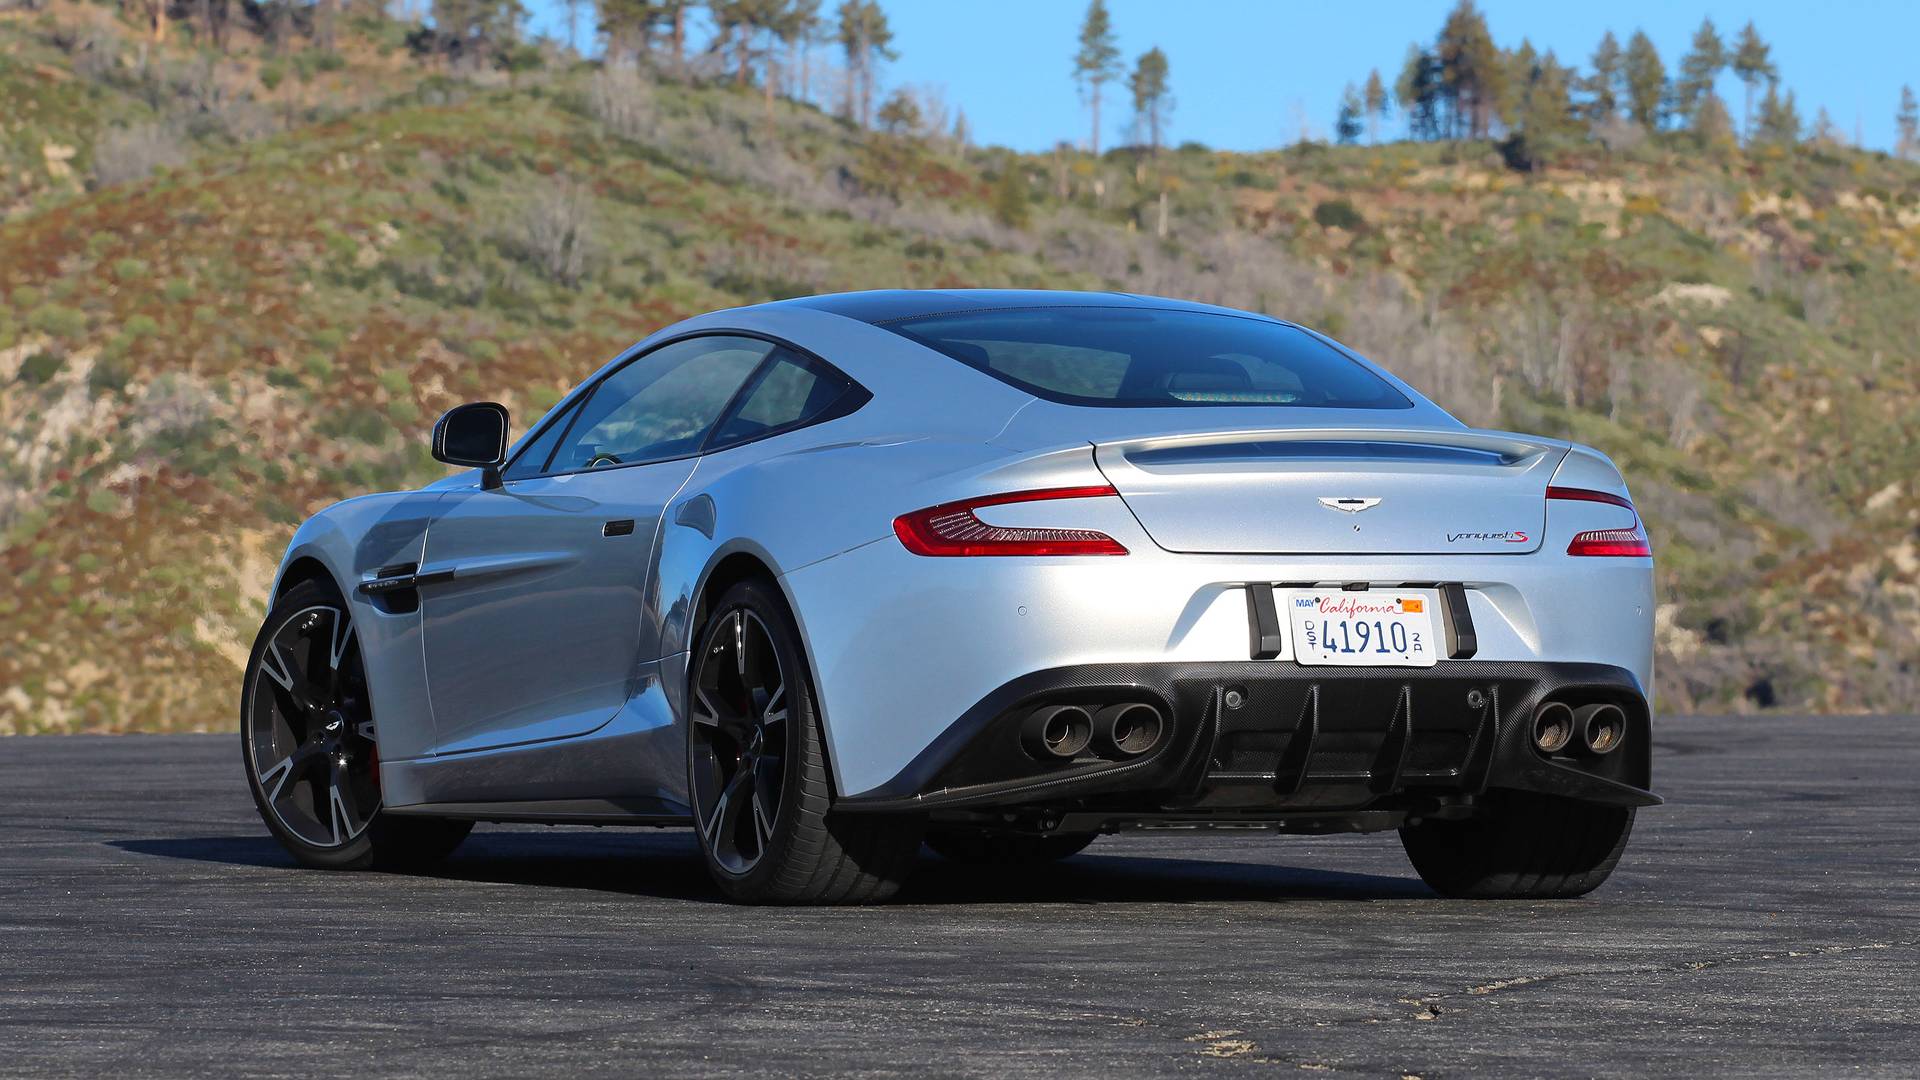 Aston Martin Vanquish S Coupe Review Going Out With A Bang